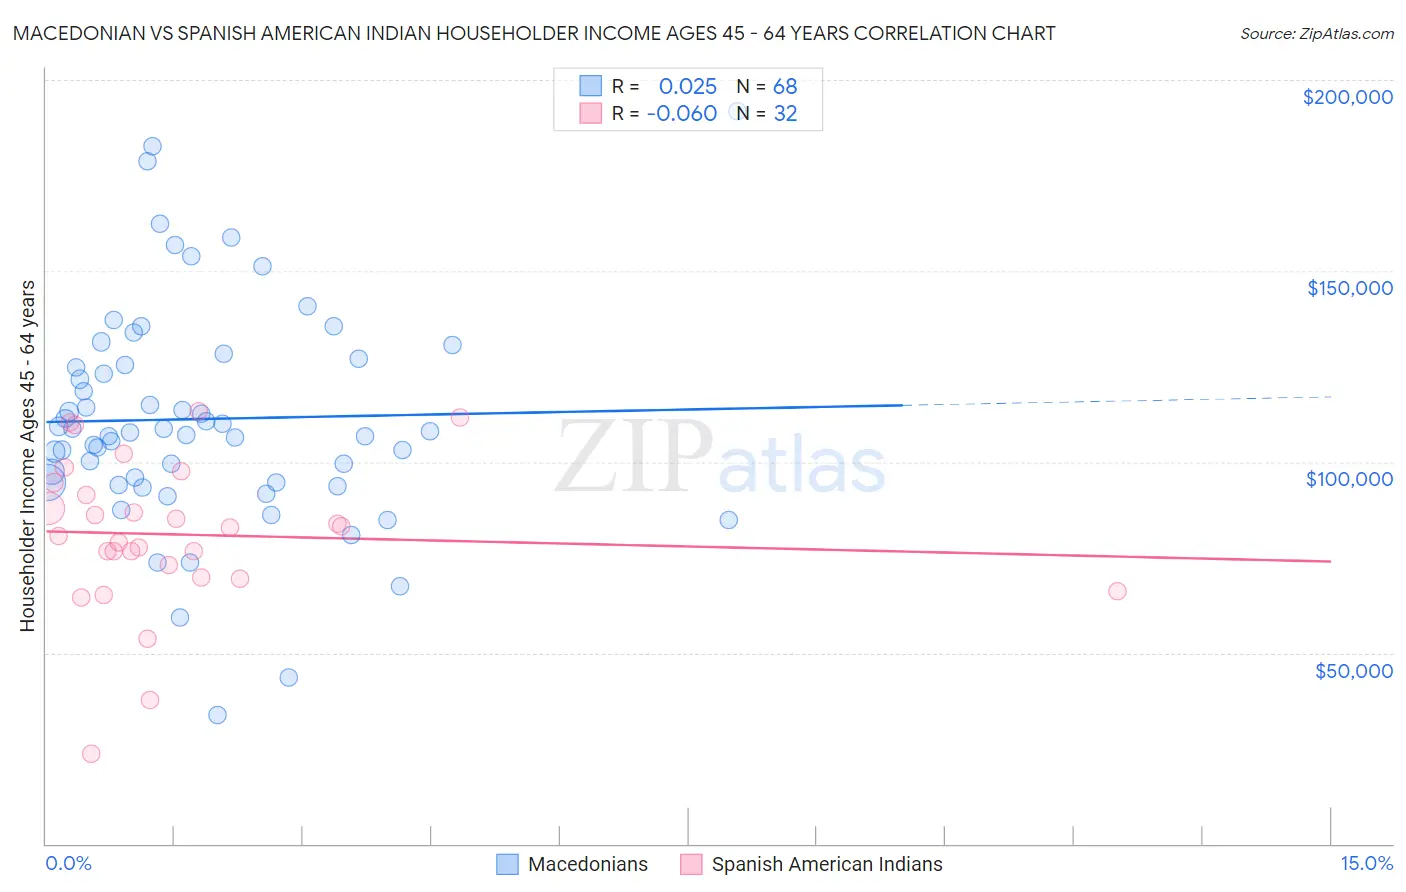 Macedonian vs Spanish American Indian Householder Income Ages 45 - 64 years